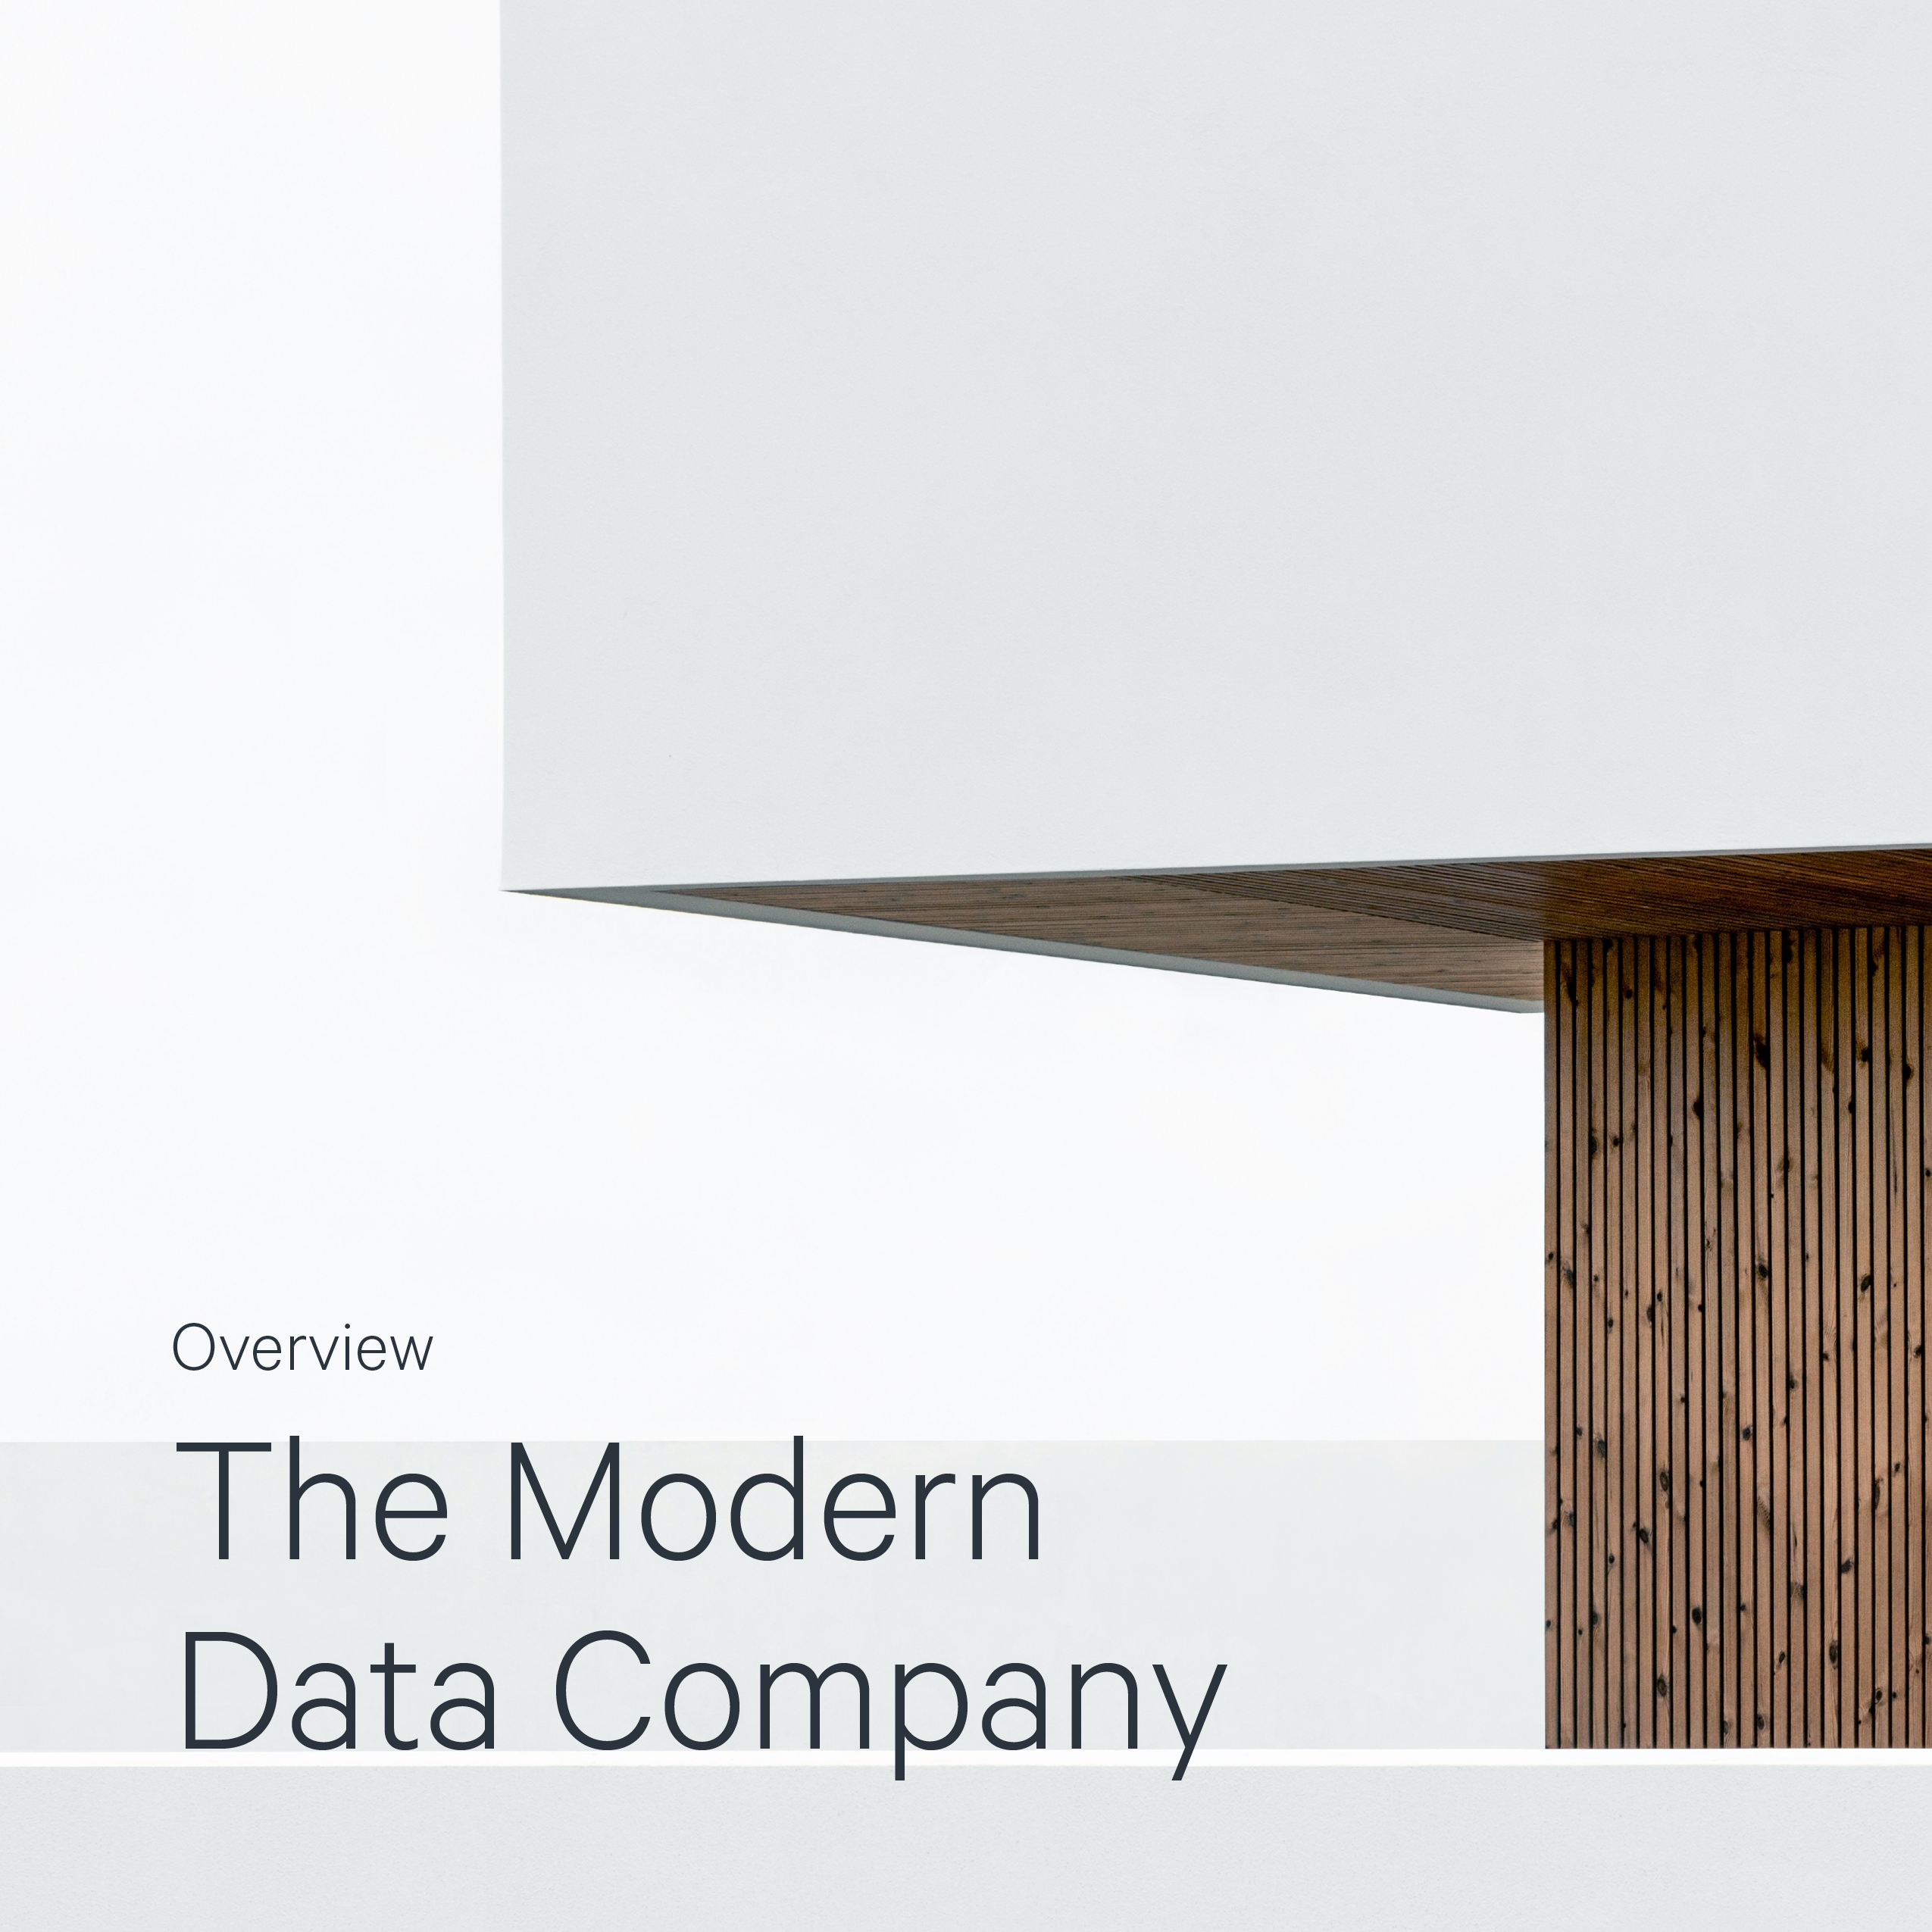 The Modern Data Company Overview